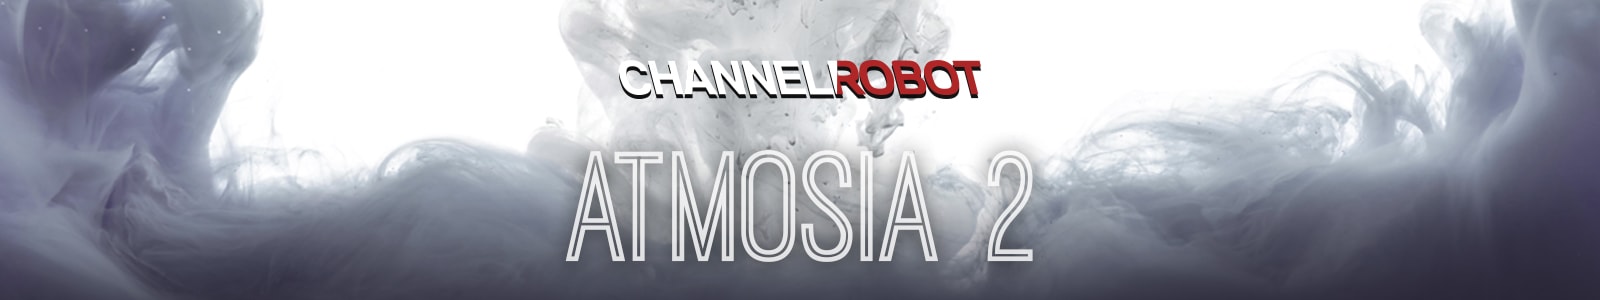 atmosia 2 by channel robot